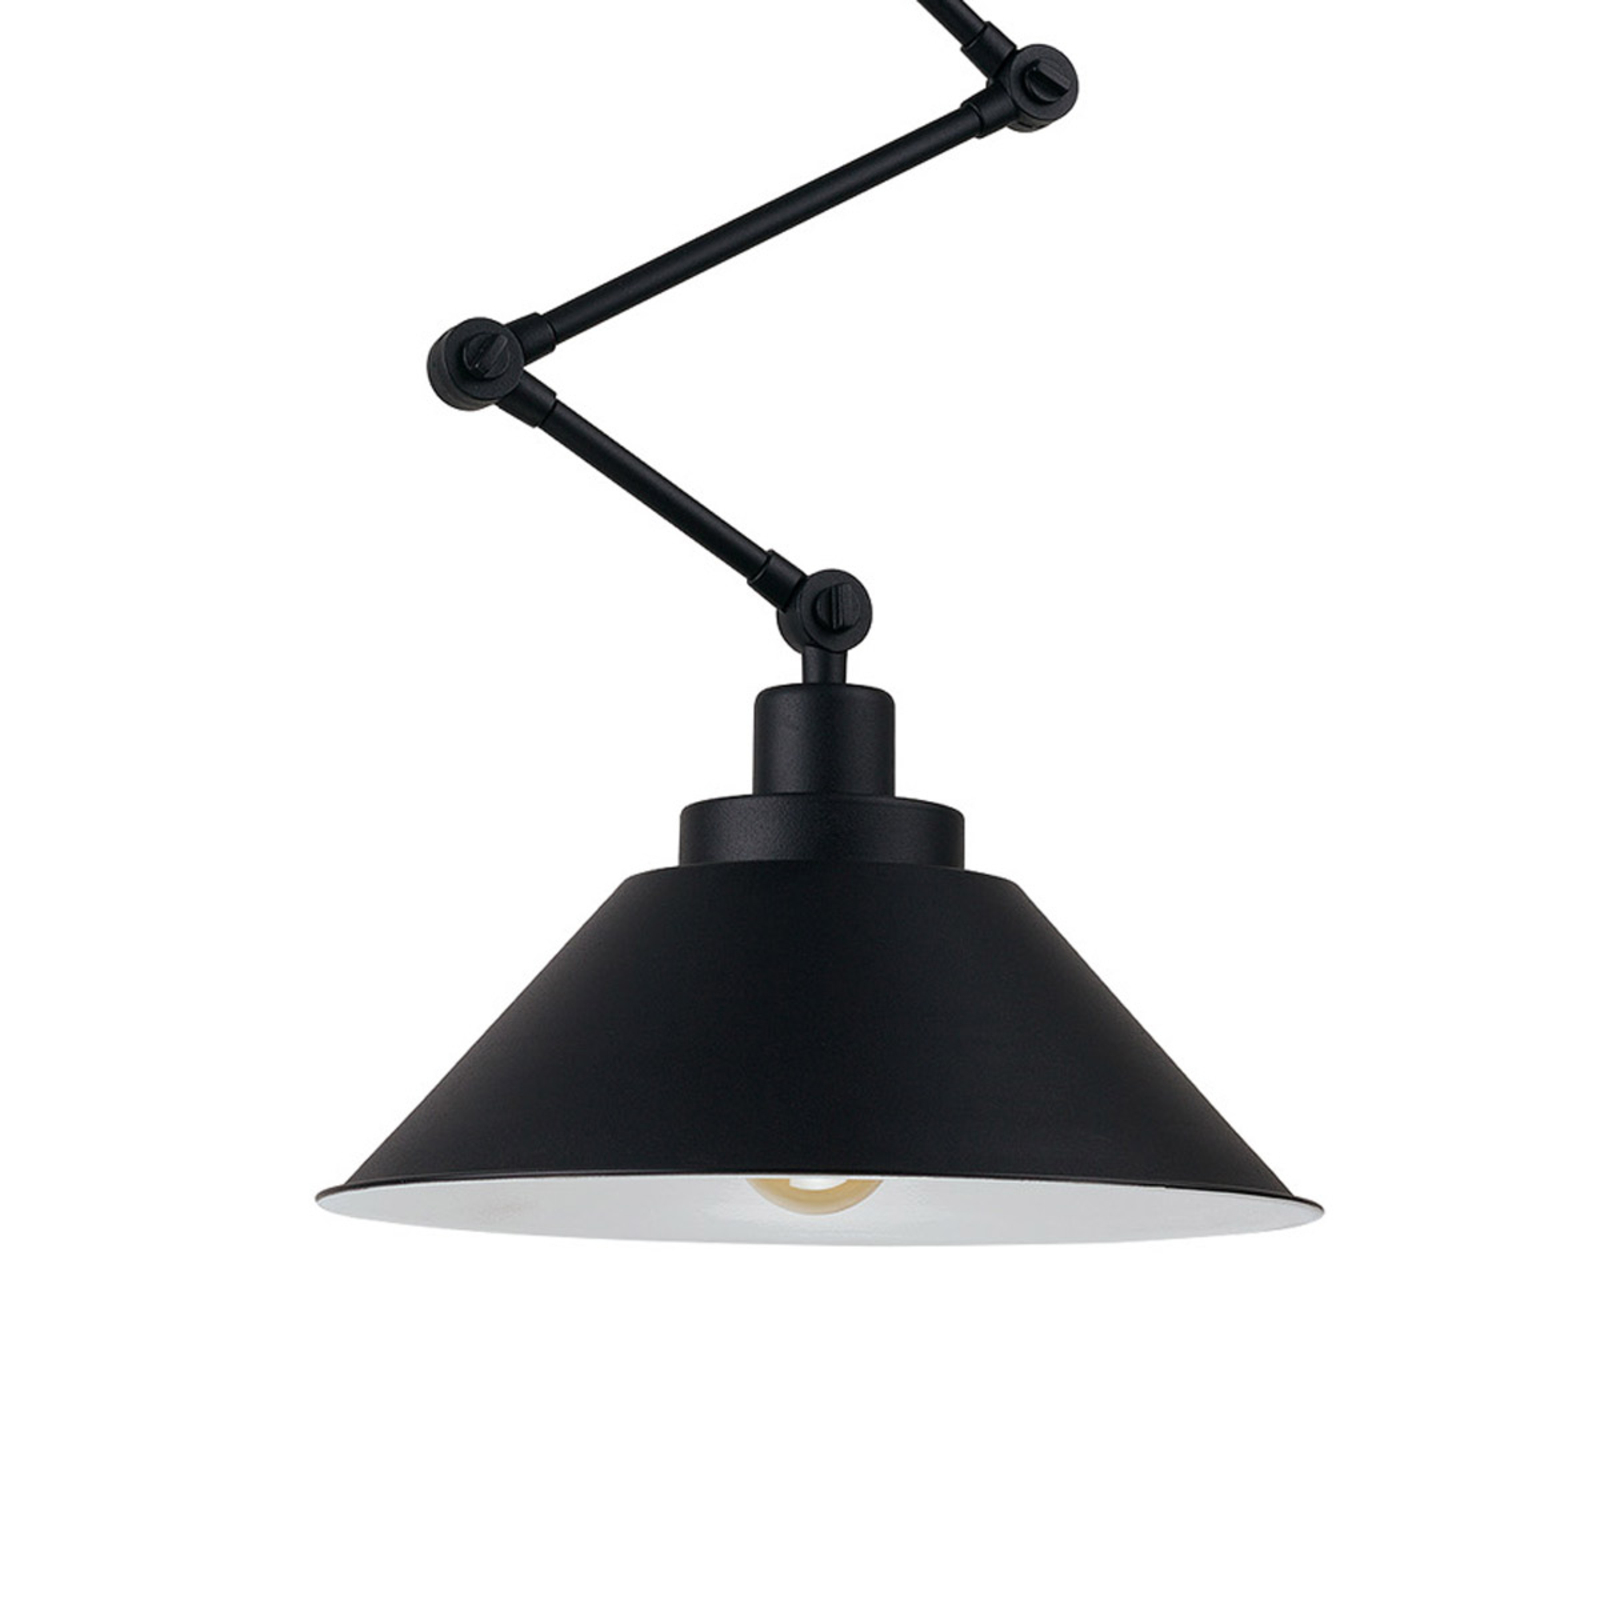 Pantograph hanging light with articulated suspension, black